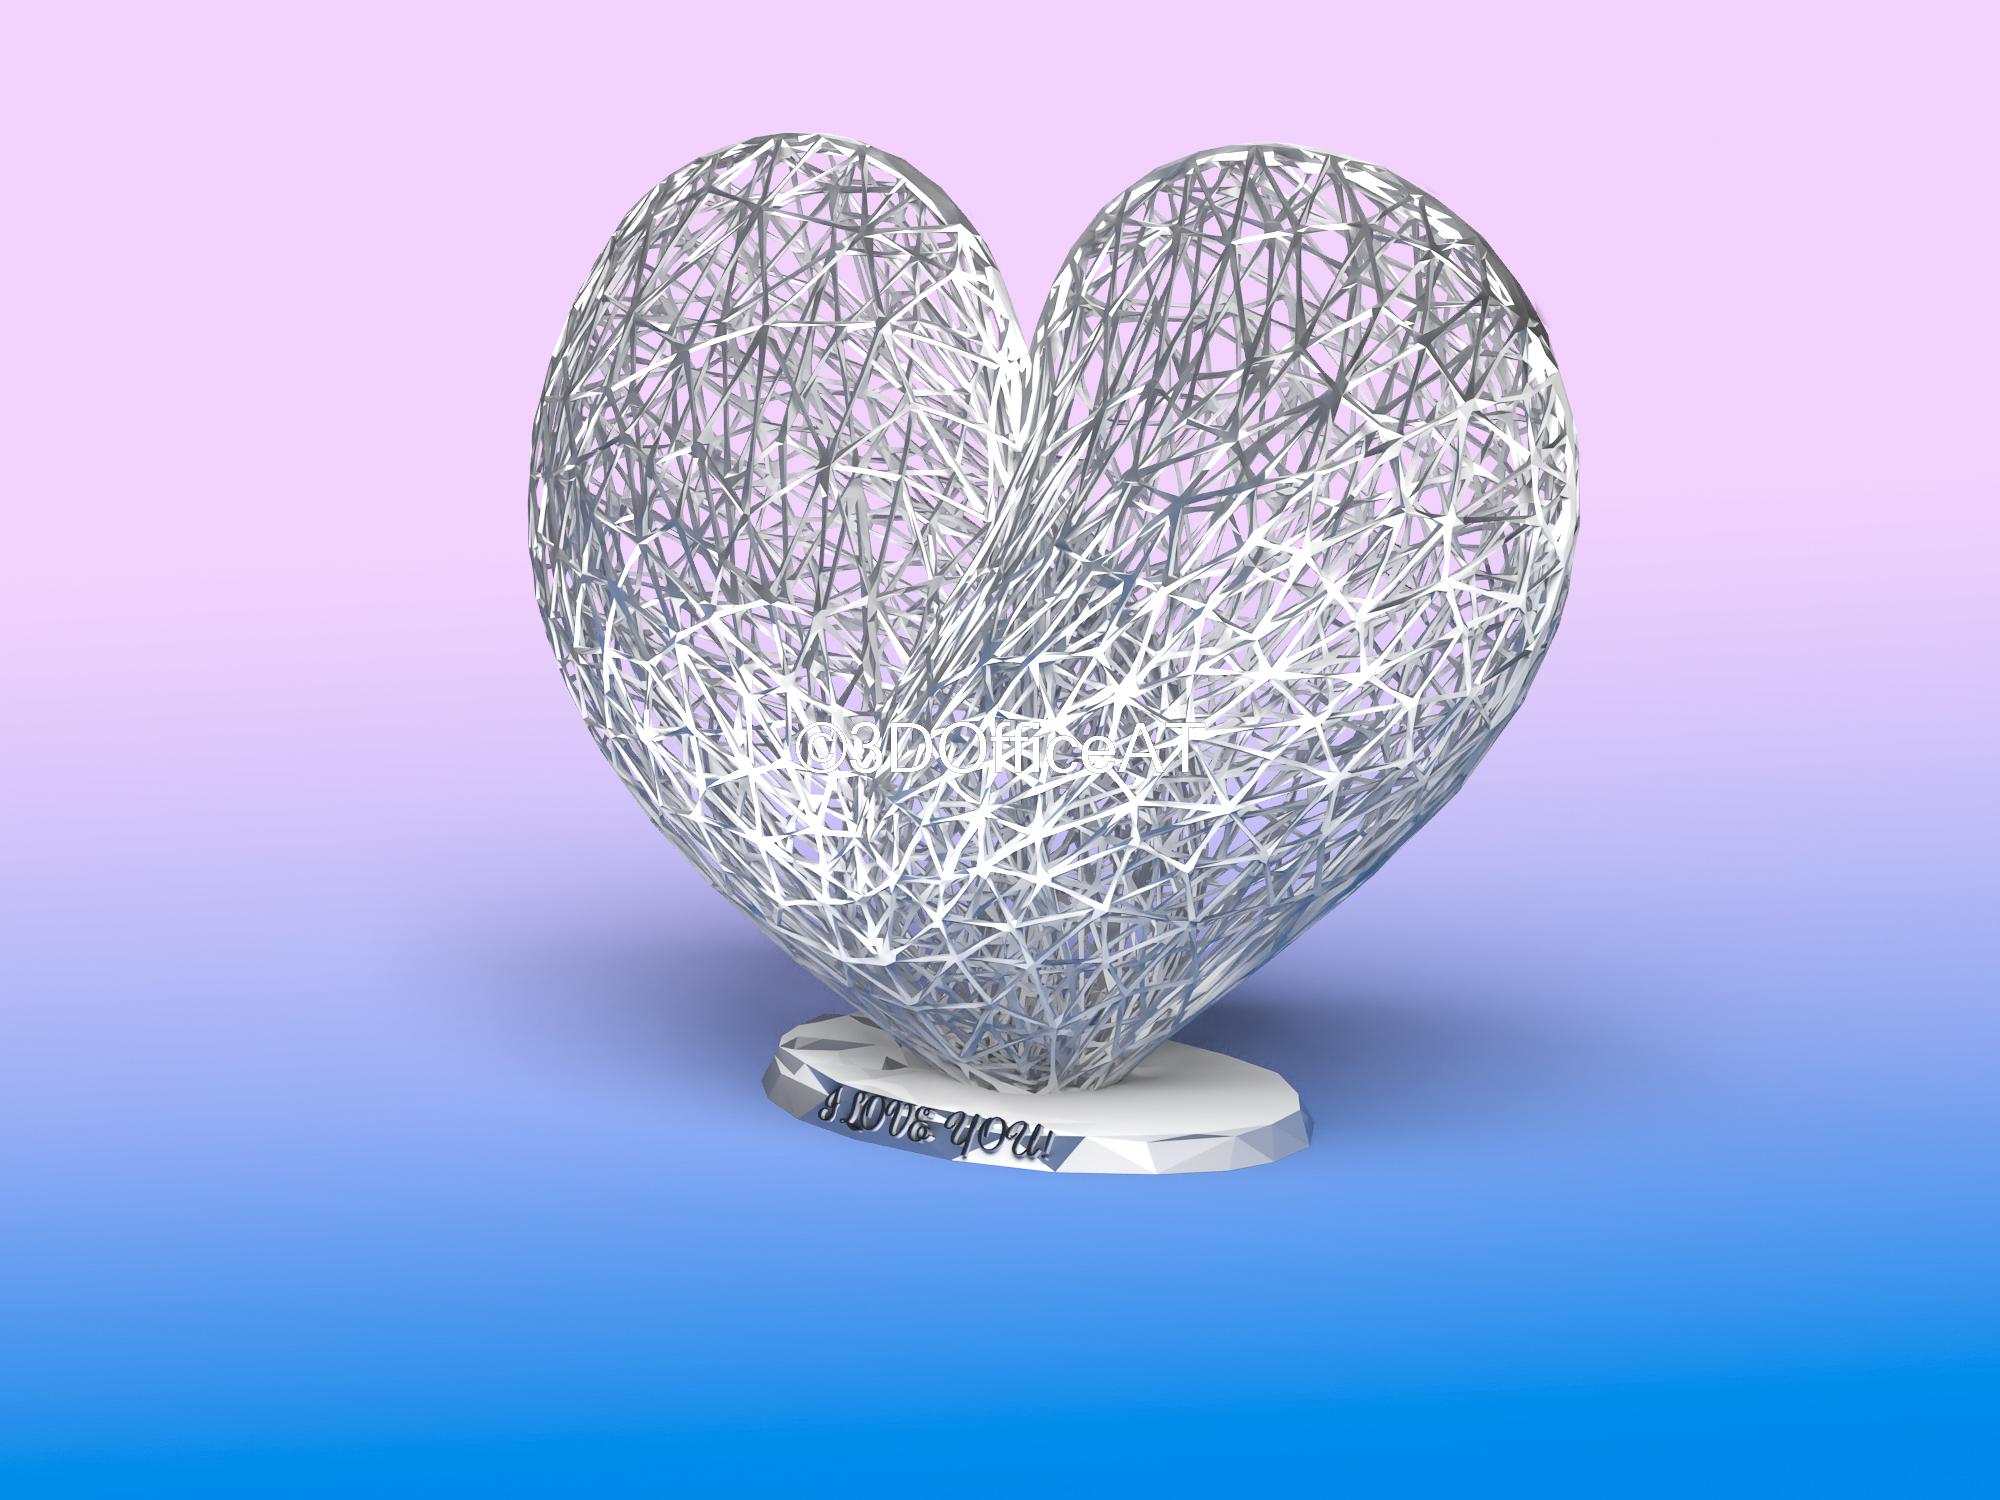 Valentine's day heart - "i love you" 3d model